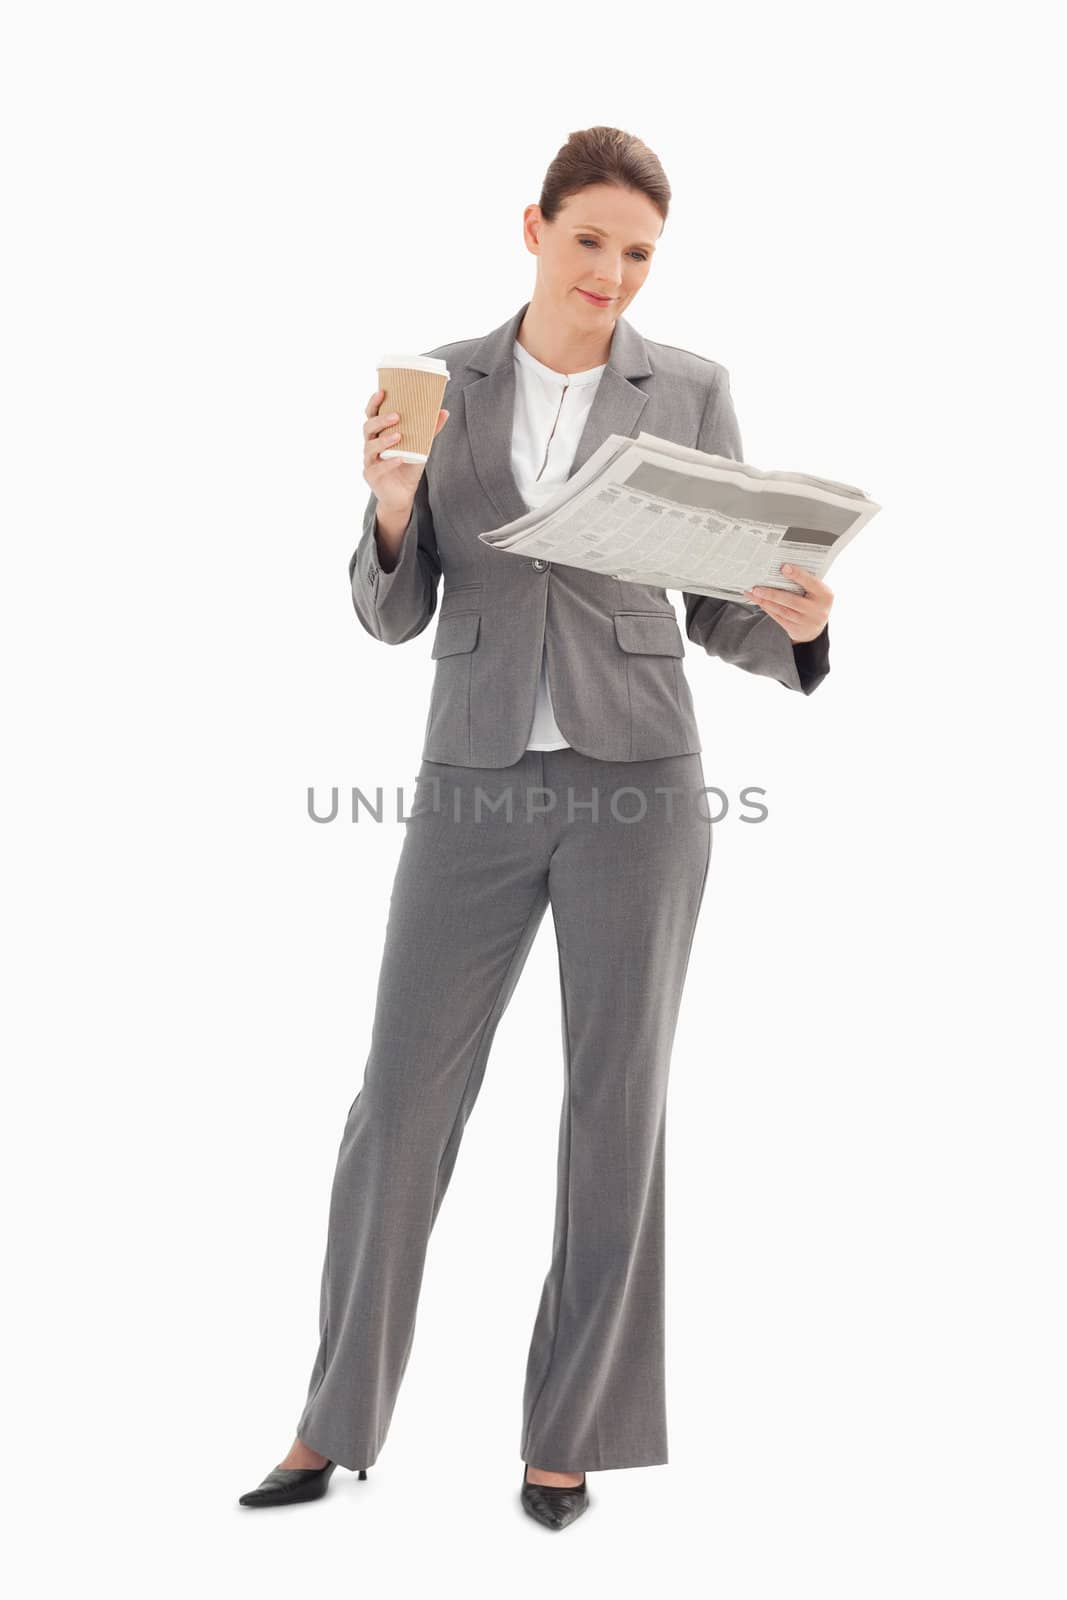 Businesswoman reading newspaper and holding coffee by Wavebreakmedia